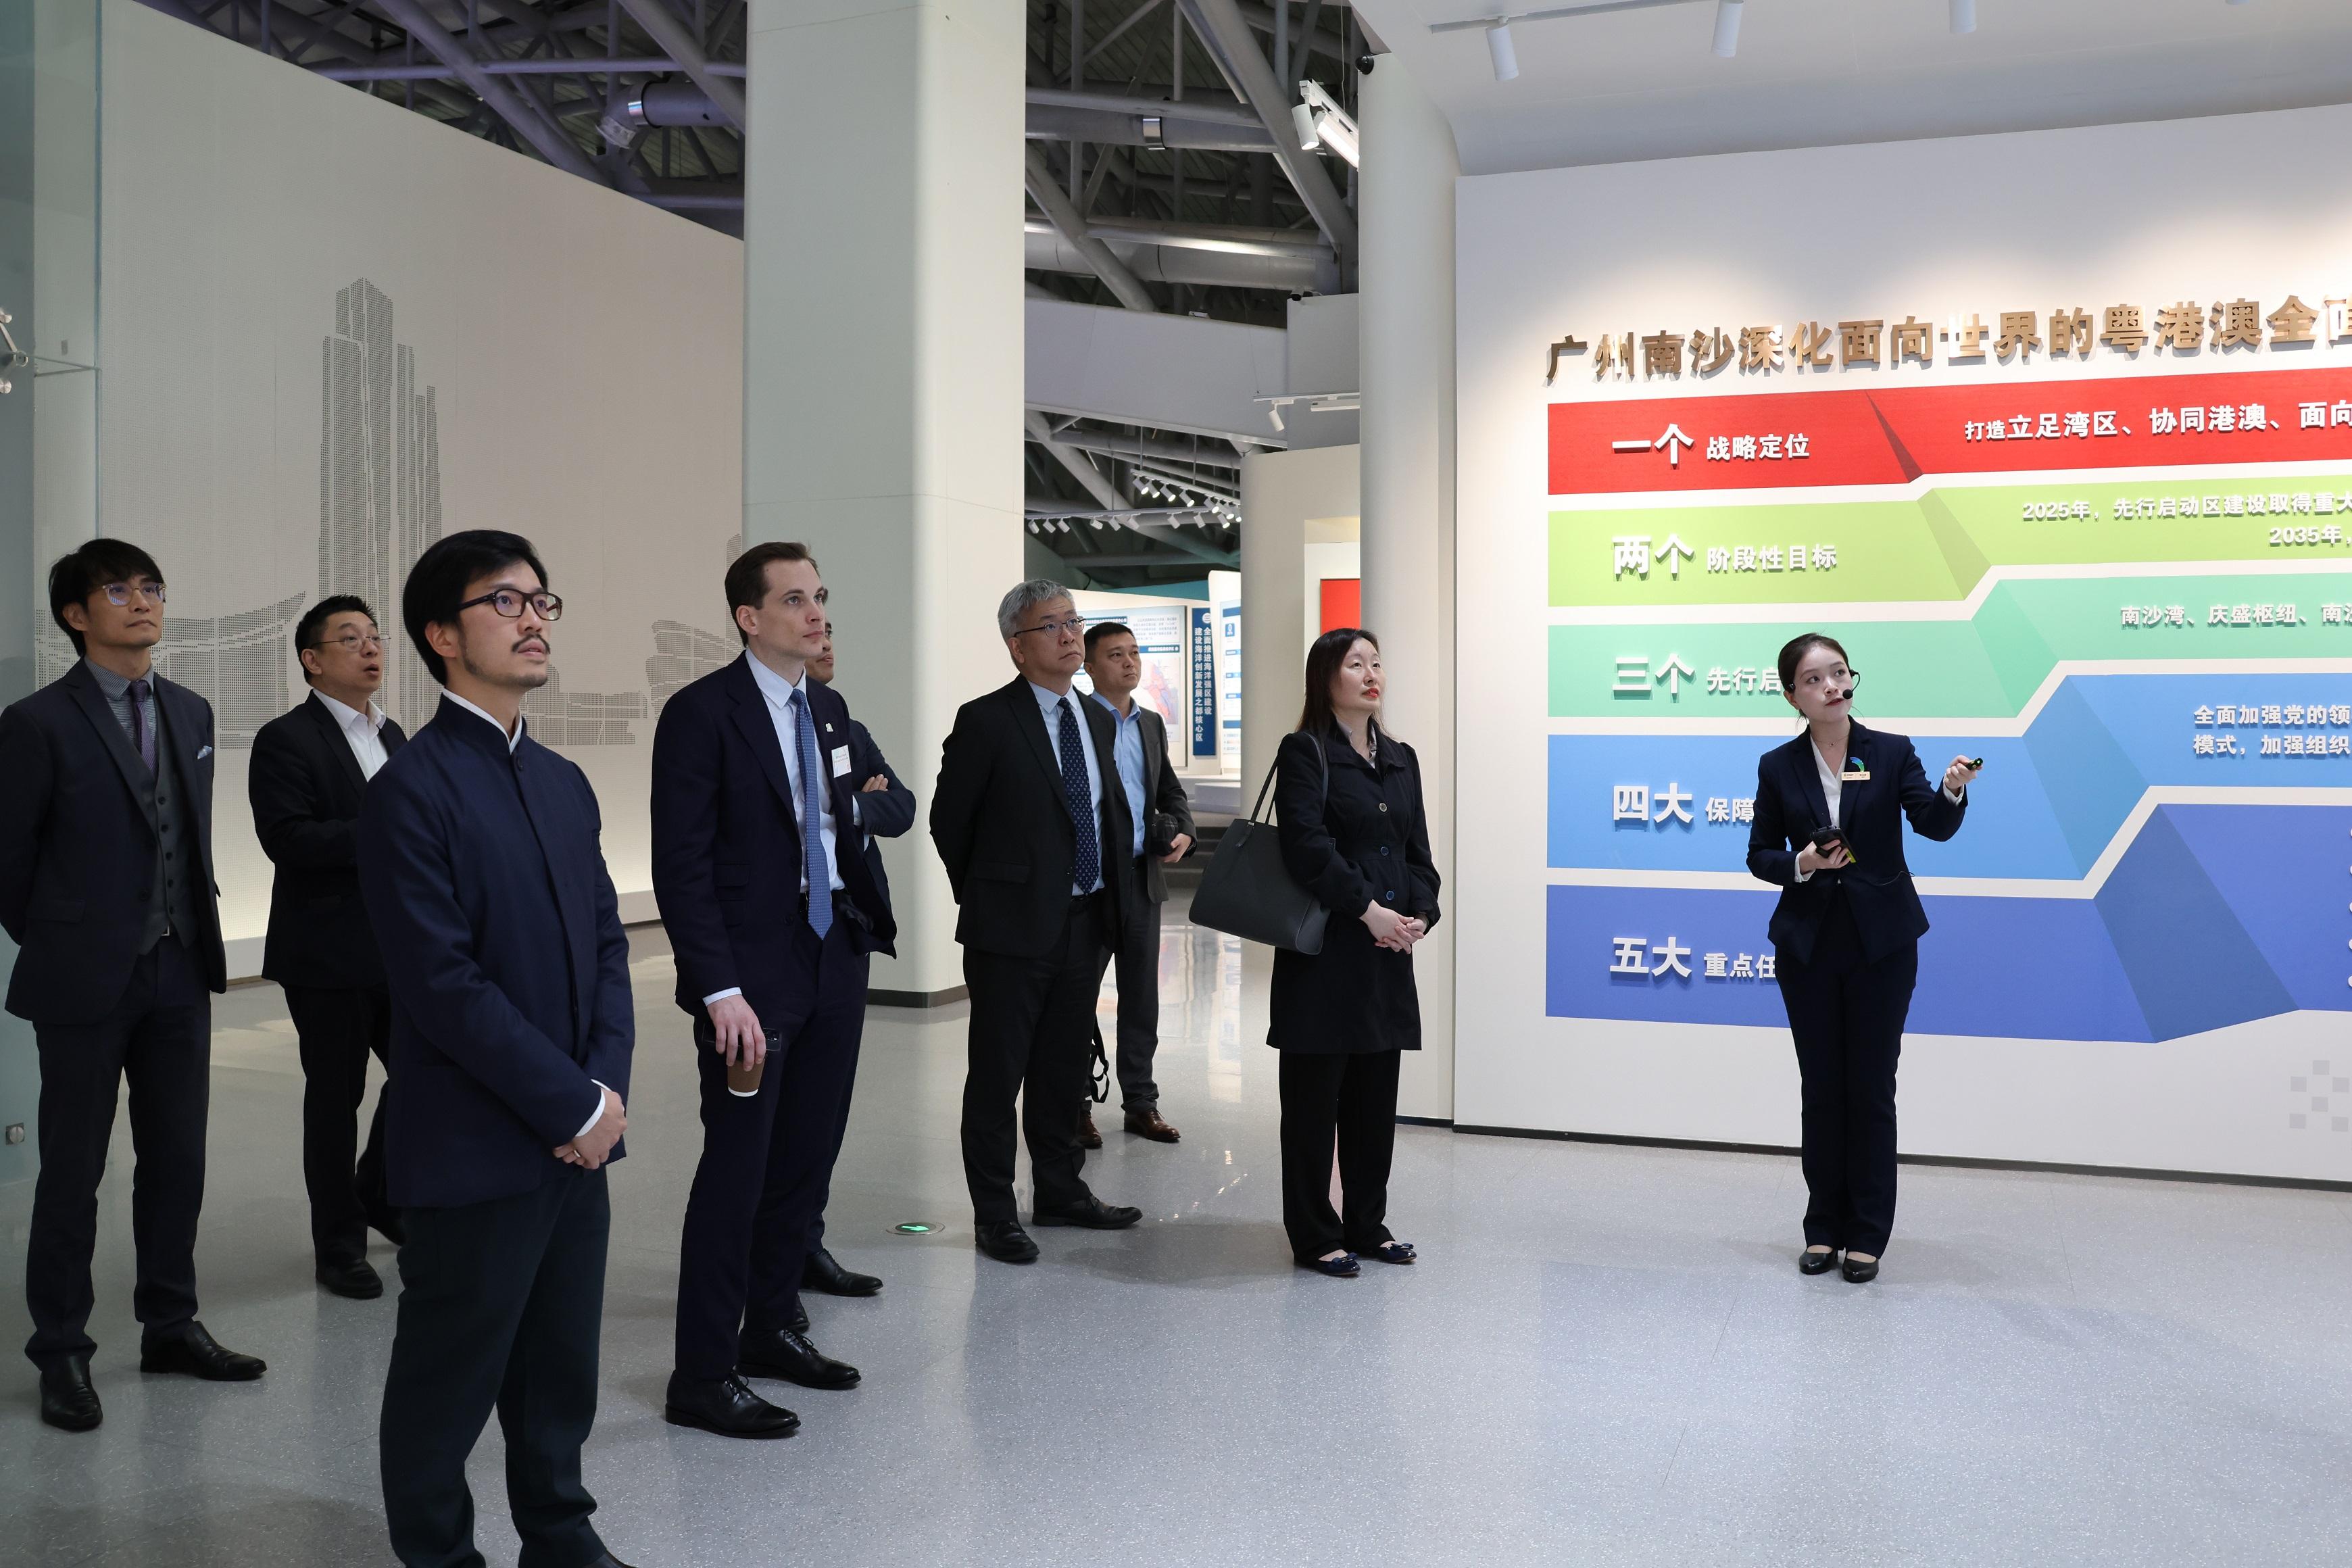 The business delegation of enterprises of Belt and Road countries operating in Hong Kong, led by the Secretary for Commerce and Economic Development, Mr Algernon Yau, continued the visit to the Guangdong-Hong Kong-Macao Greater Bay Area today (December 5). The delegation visited the Nansha Planning Exhibition Hall in Nansha District, Guangzhou. Photo shows the Commissioner for Belt and Road, Mr Nicholas Ho (front row, first left), the Director of the Hong Kong Economic and Trade Office in Guangdong, Miss Linda So (front row, second right), and delegates being briefed by a representative of the exhibition hall about the district's development and achievements in recent years, as well as the blueprint for its future development.